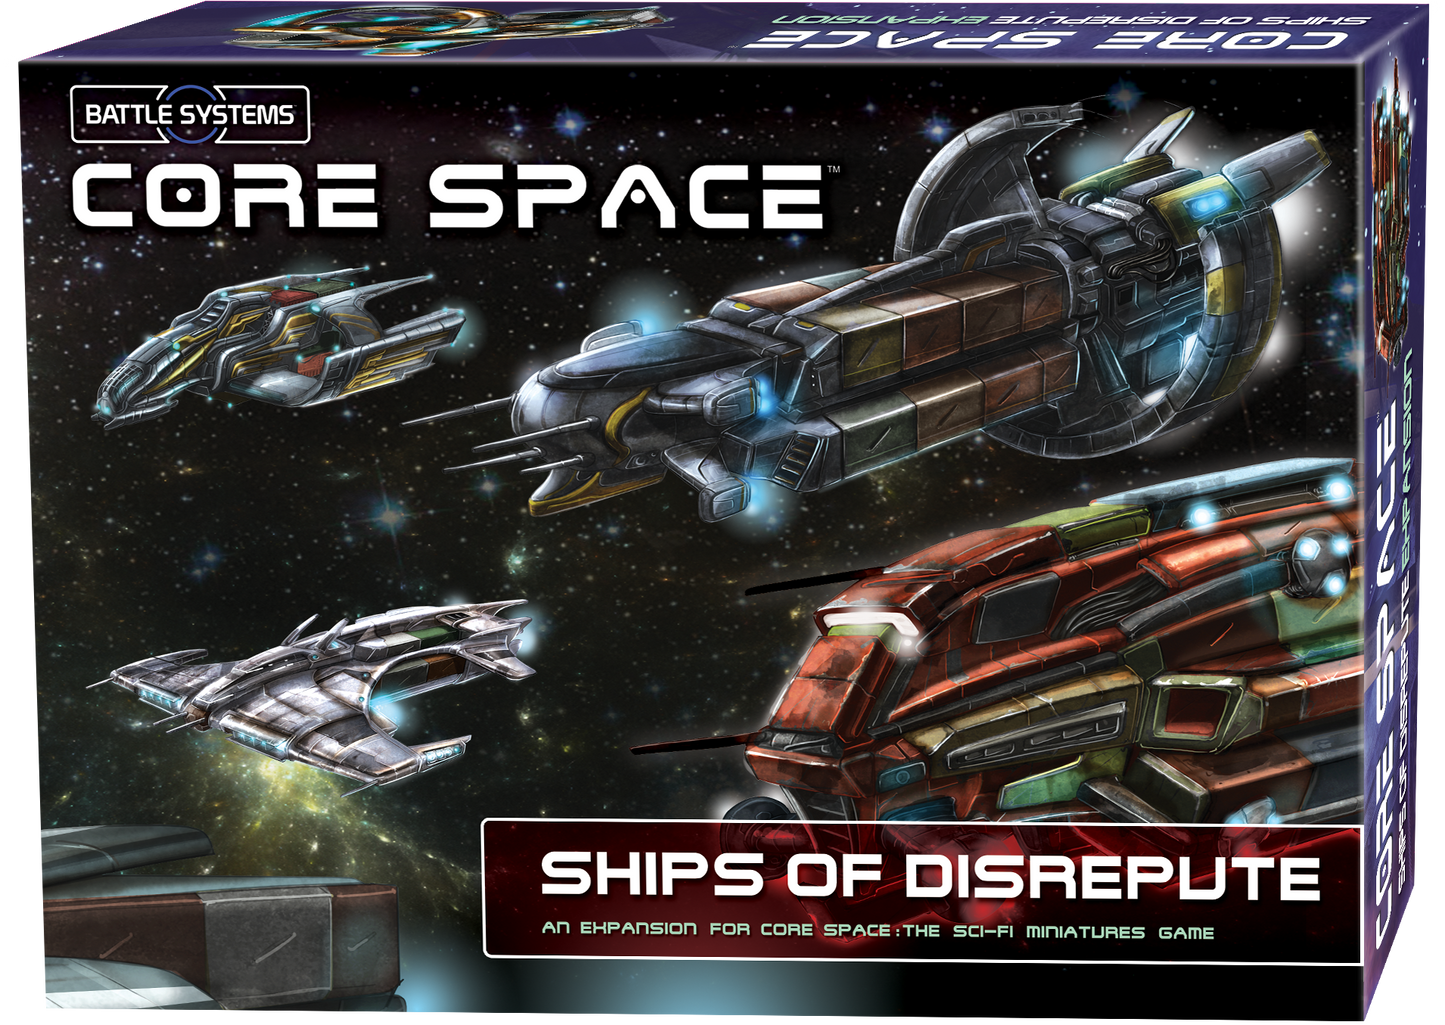 CORE SPACE: SHIPS OF DISREPUTE